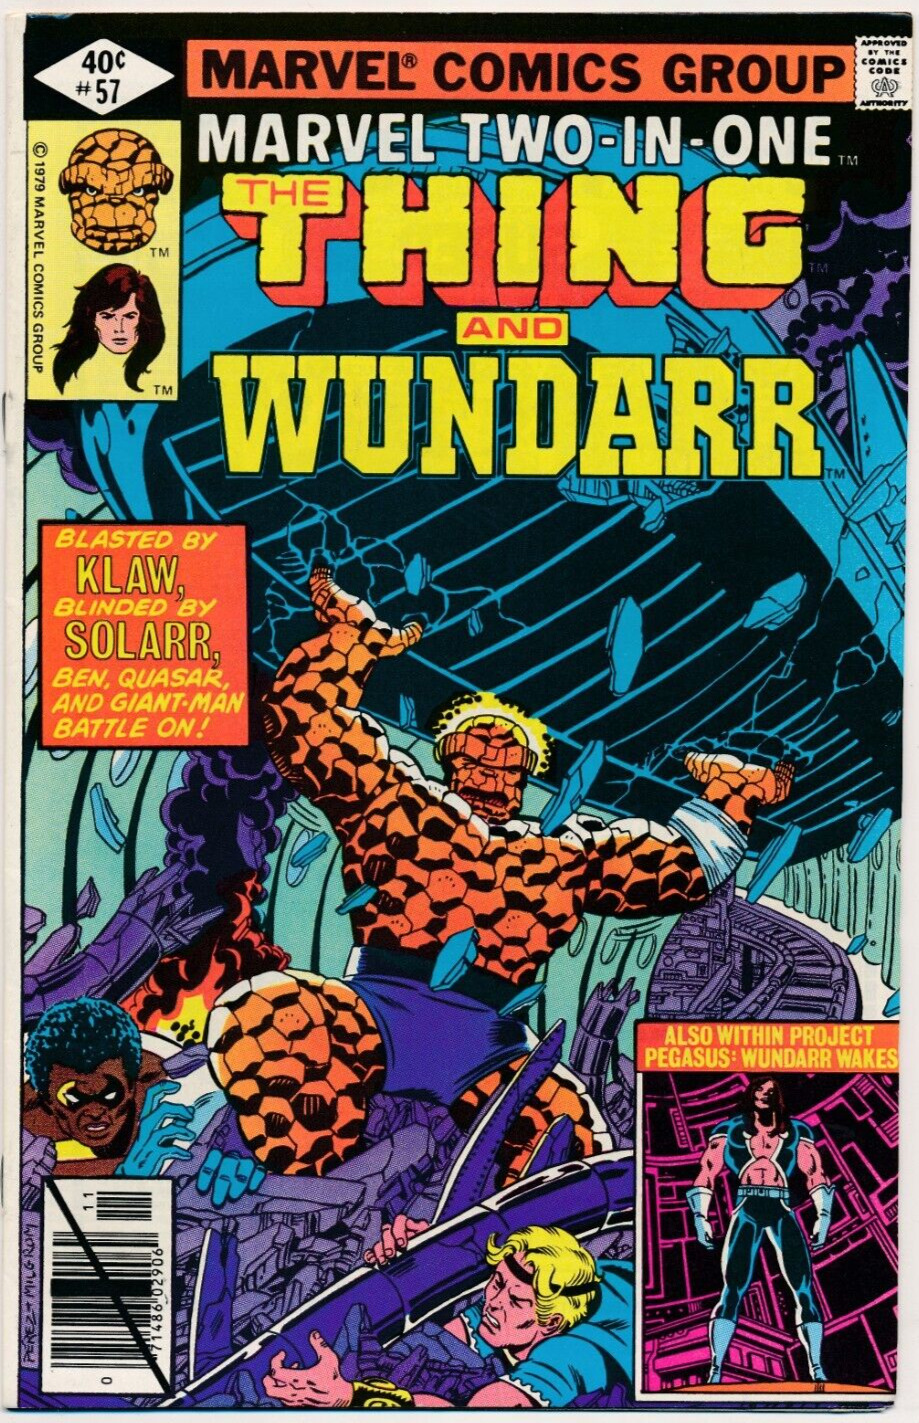 Marvel Two-In-One (Marvel, 1974 series) #57 VF/NM Thing and Wundarr